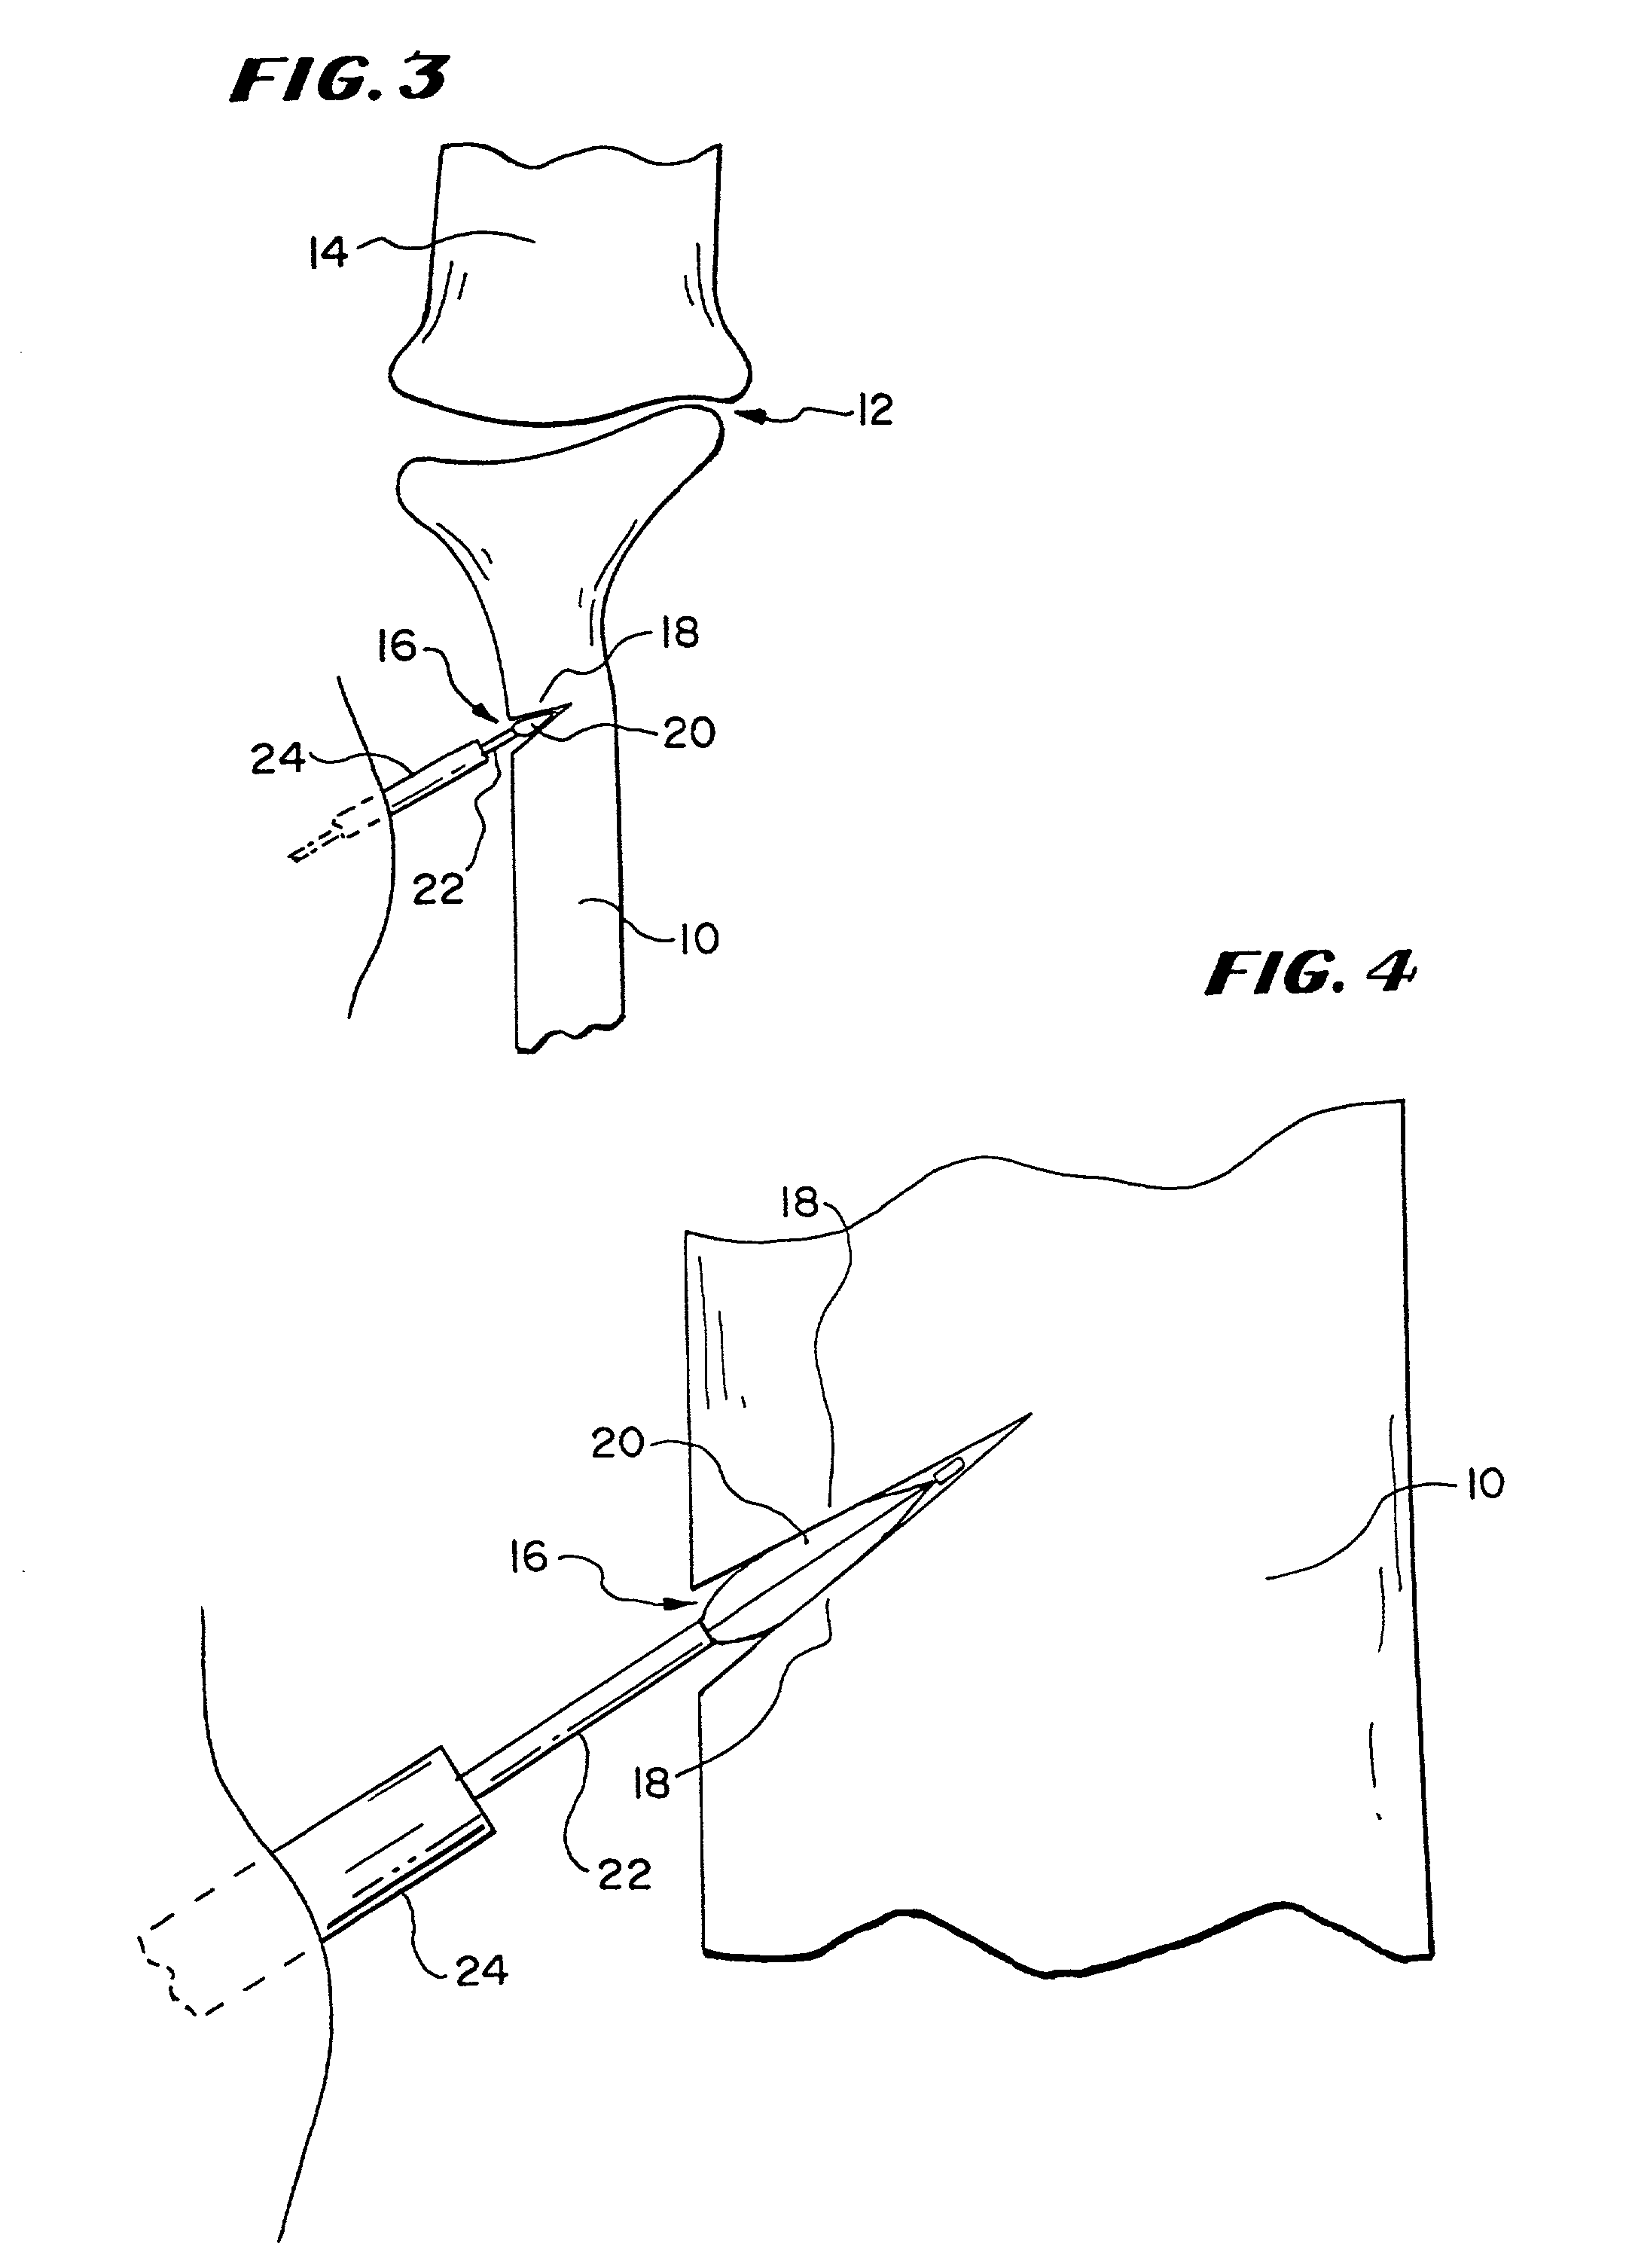 Systems and methods using expandable bodies to push apart cortical bone surfaces